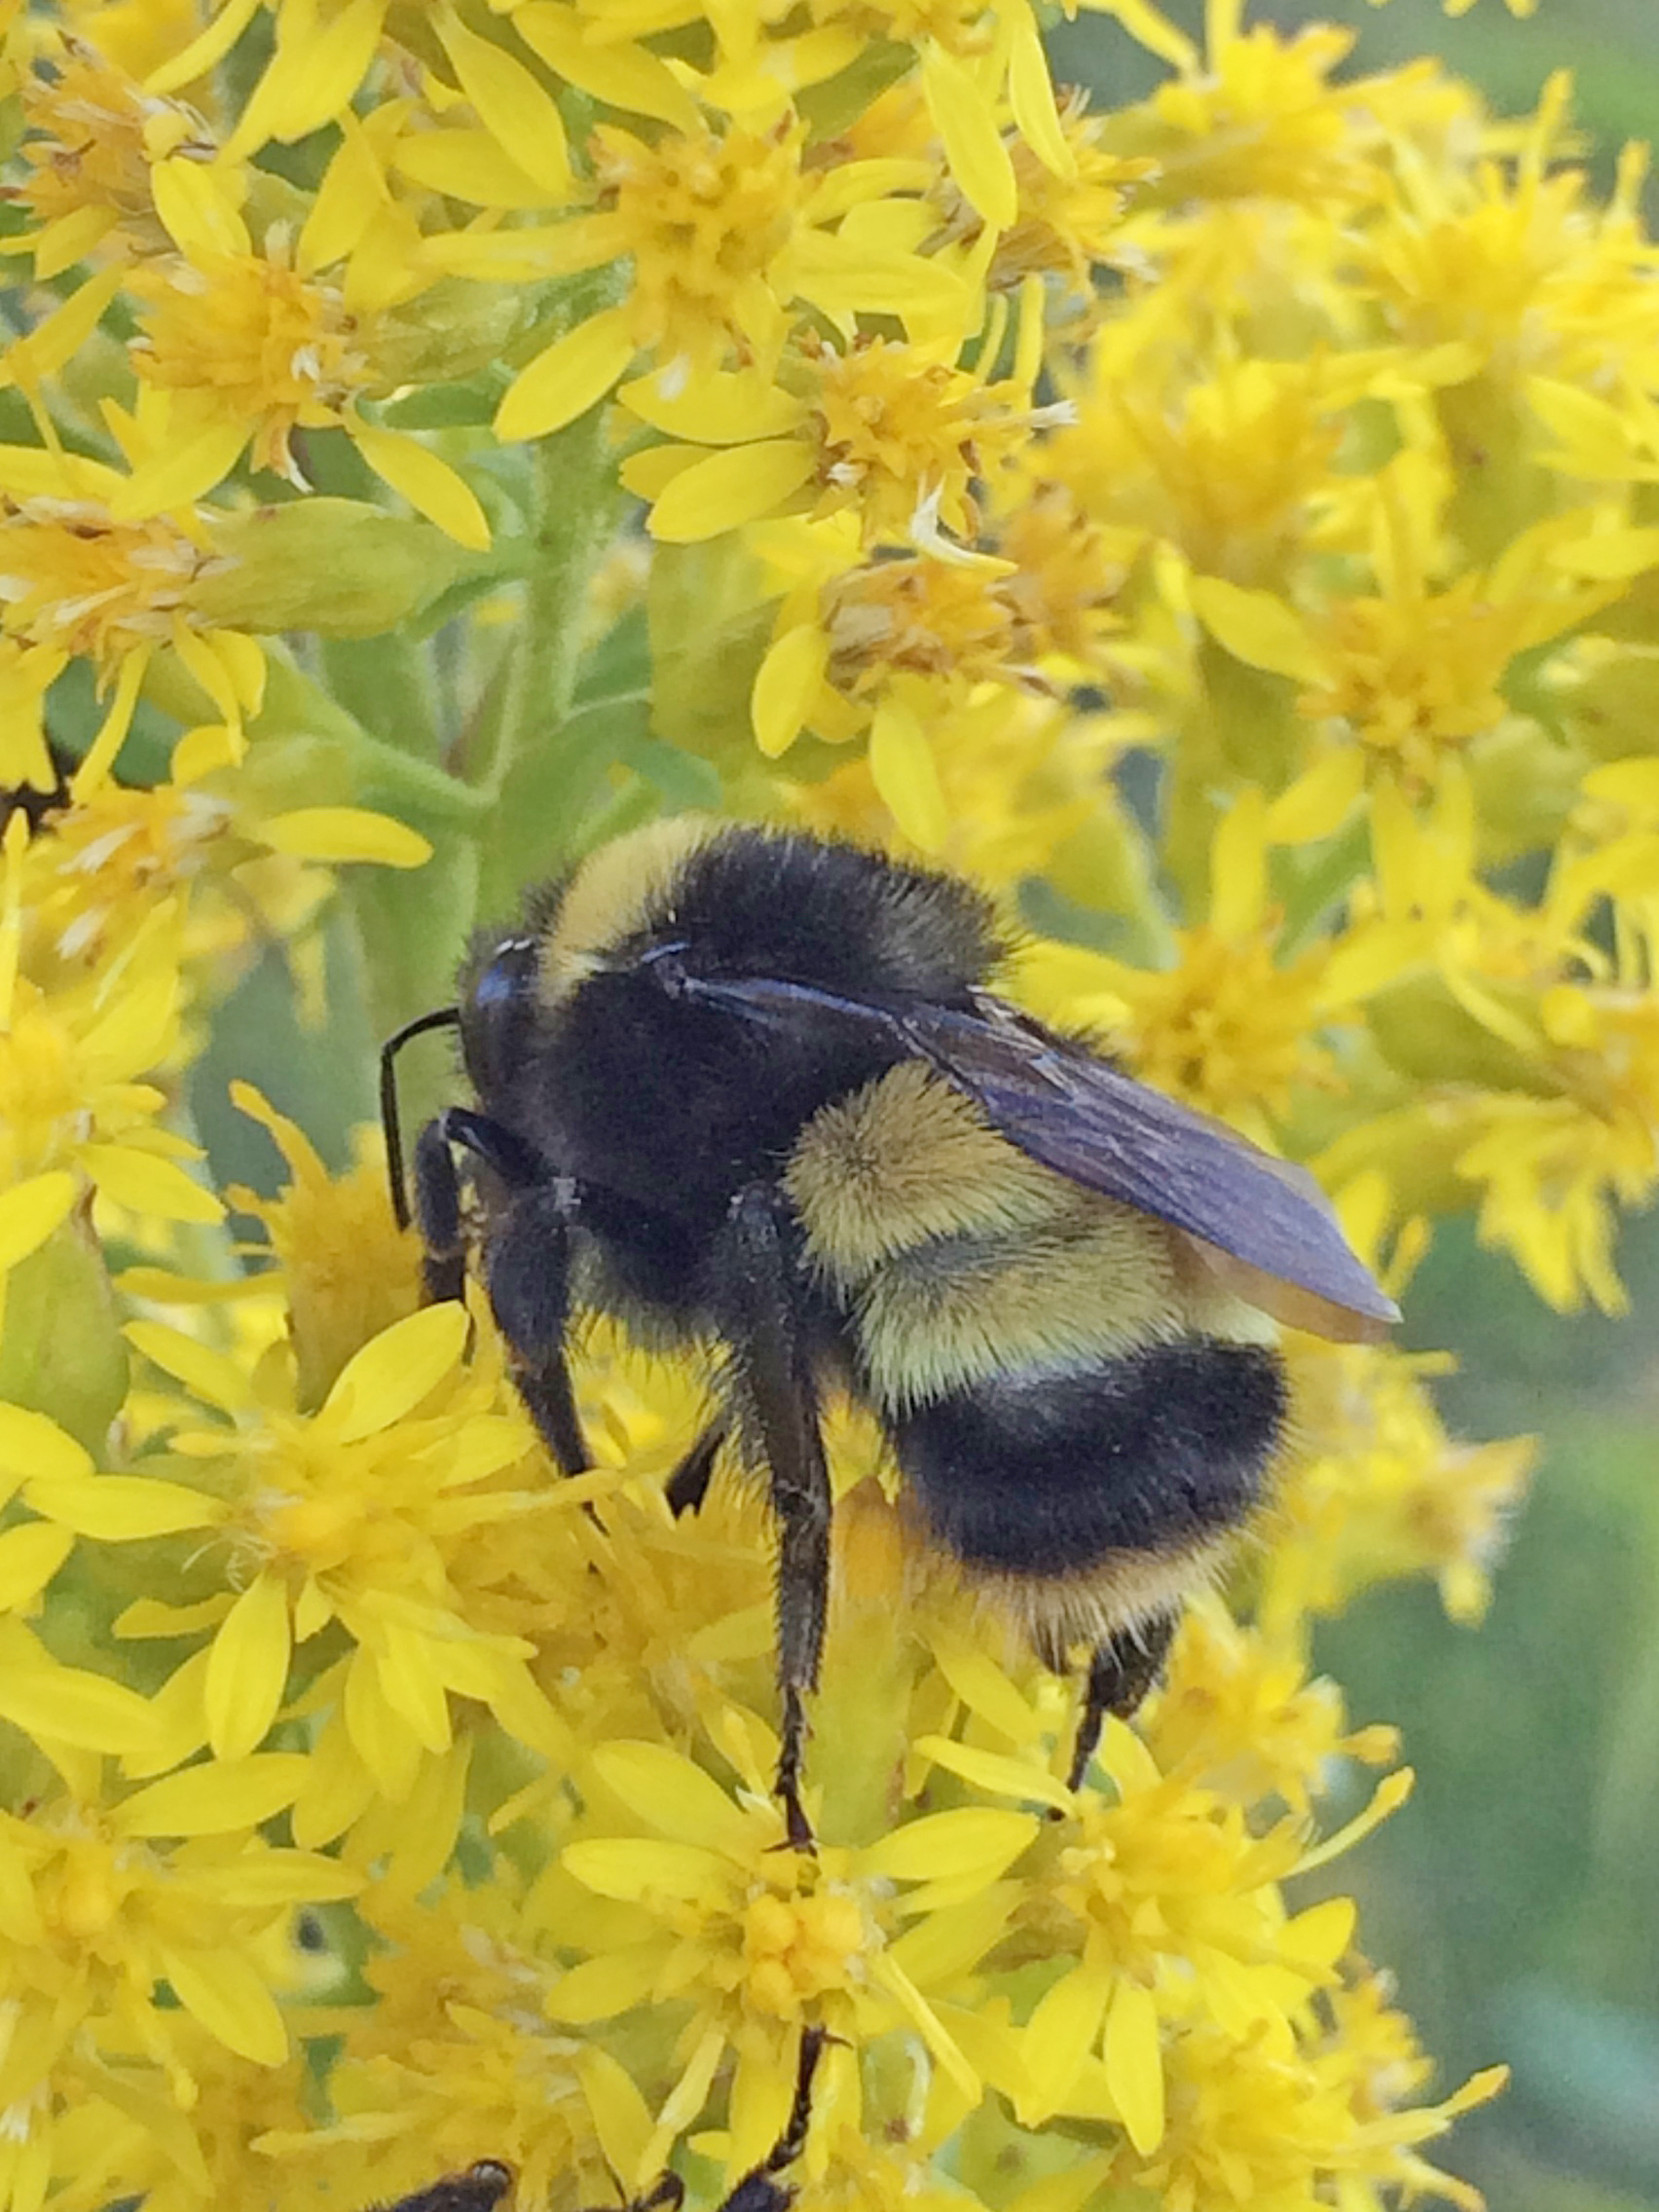 A bumble bee with two yellow bands in the center of its body pollinates a cluster of yellow flowers.